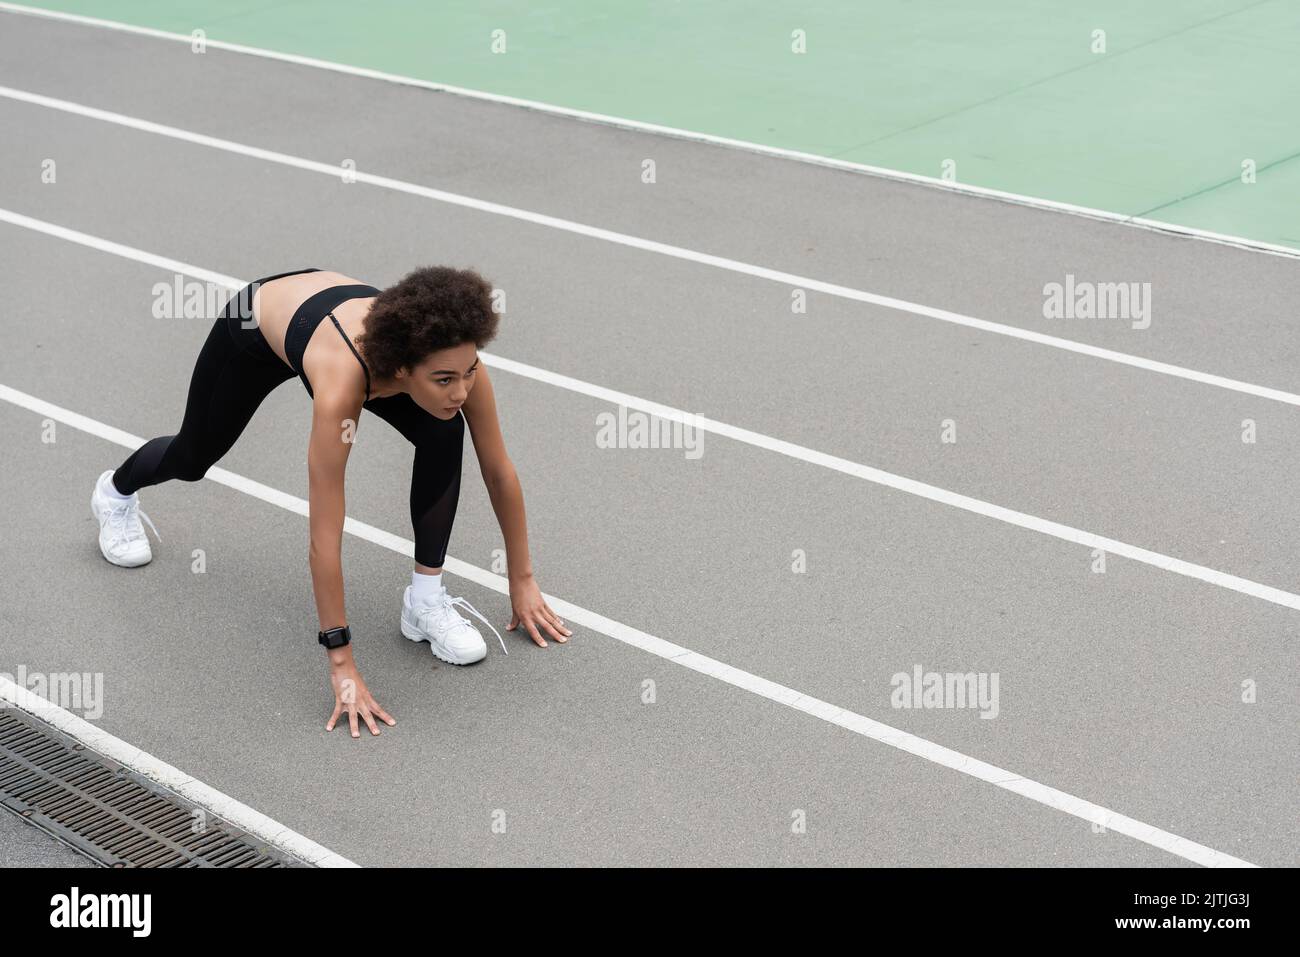 high angle view of african american runner standing in low start pose on track Stock Photo